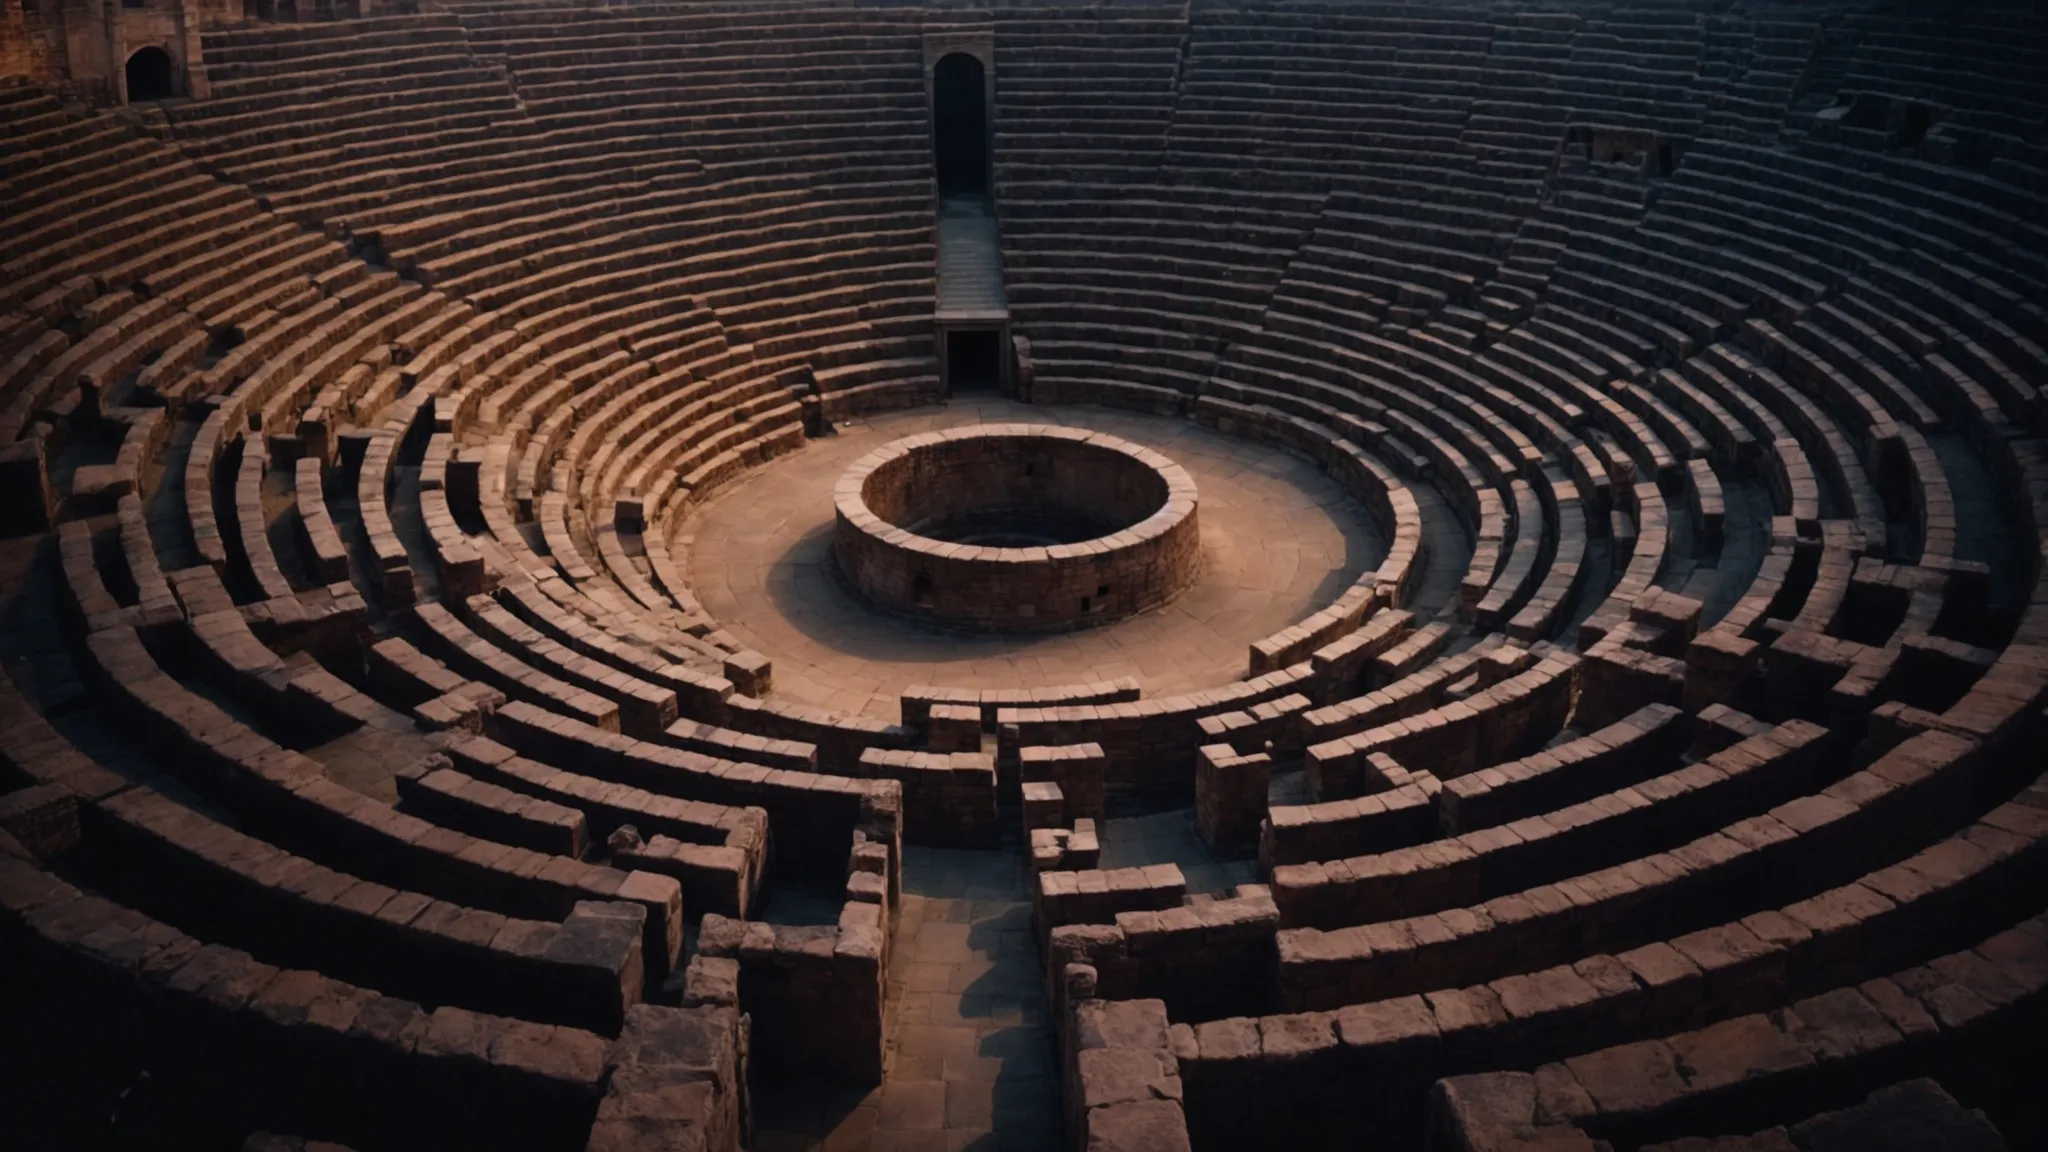 a maze constructed inside a vast, ancient coliseum under a twilight sky, symbolizing the challenges of navigating reputational risks in the business world.